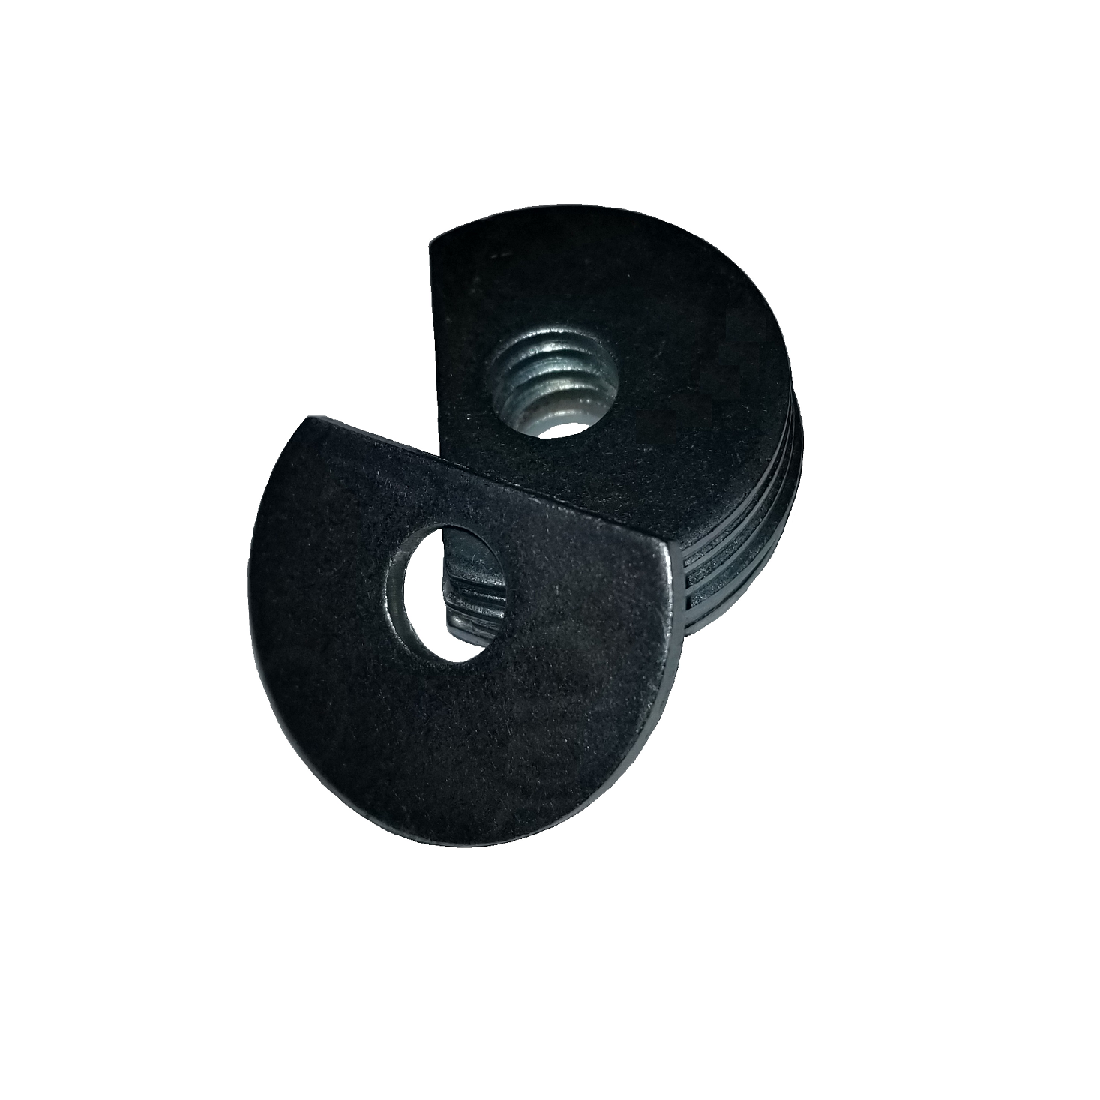 Clipped OD Washer - 0.812 ID, 1.250 OD, 0.062 Thick, Low Carbon Steel - Soft